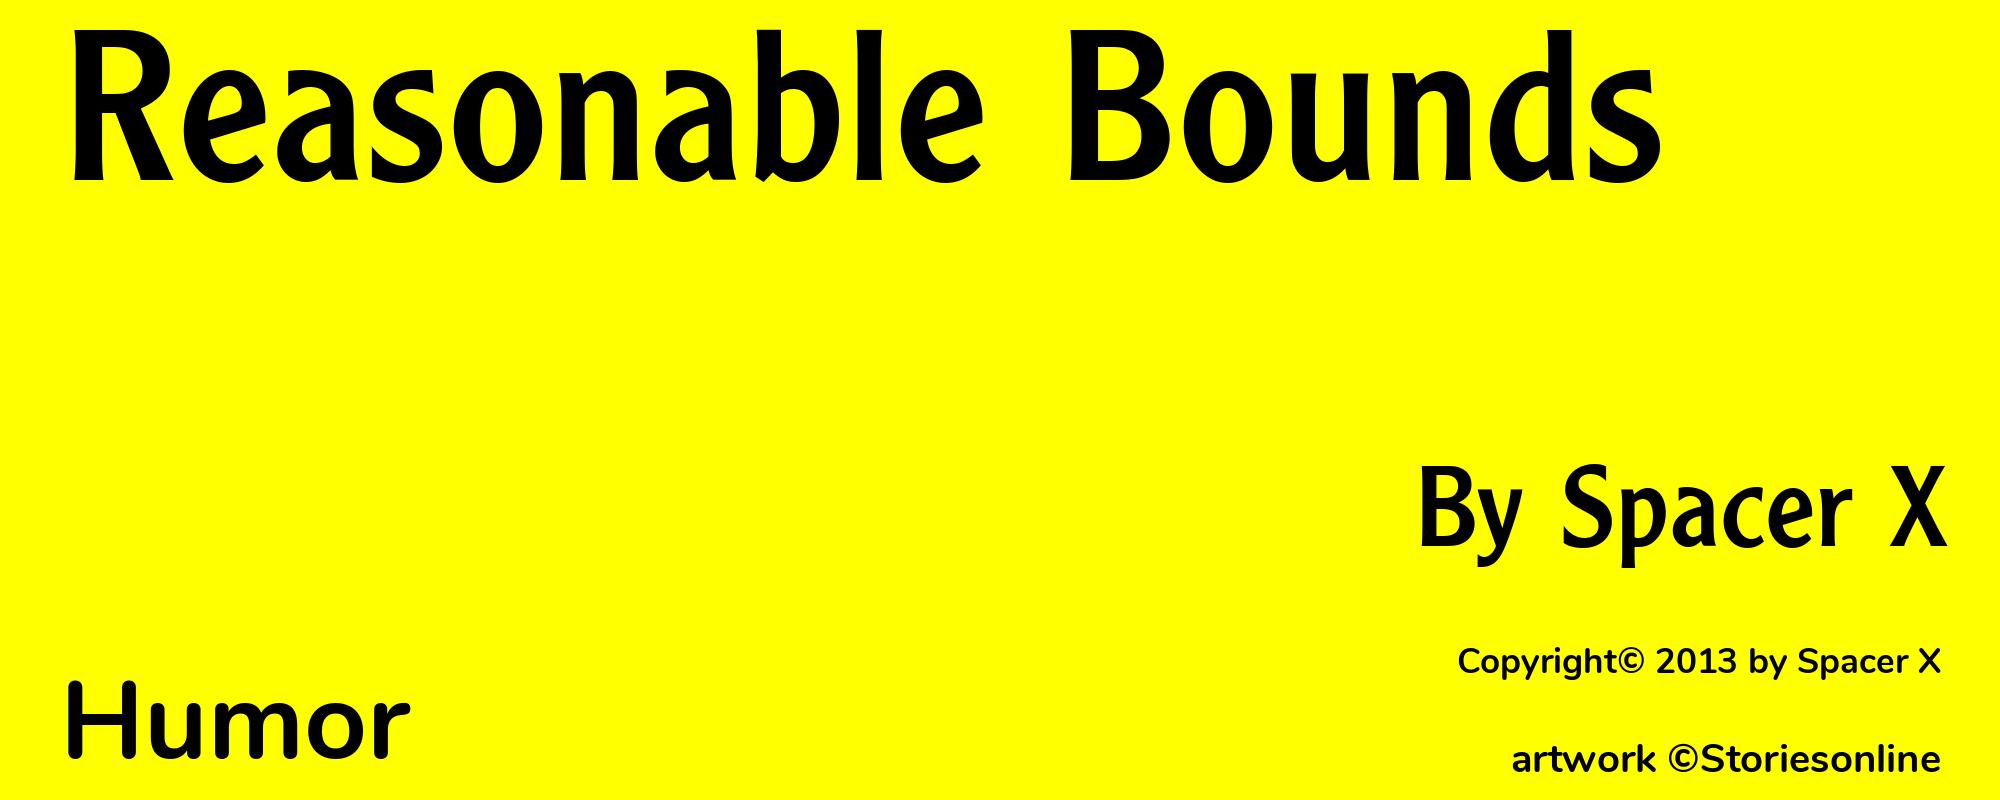 Reasonable Bounds - Cover